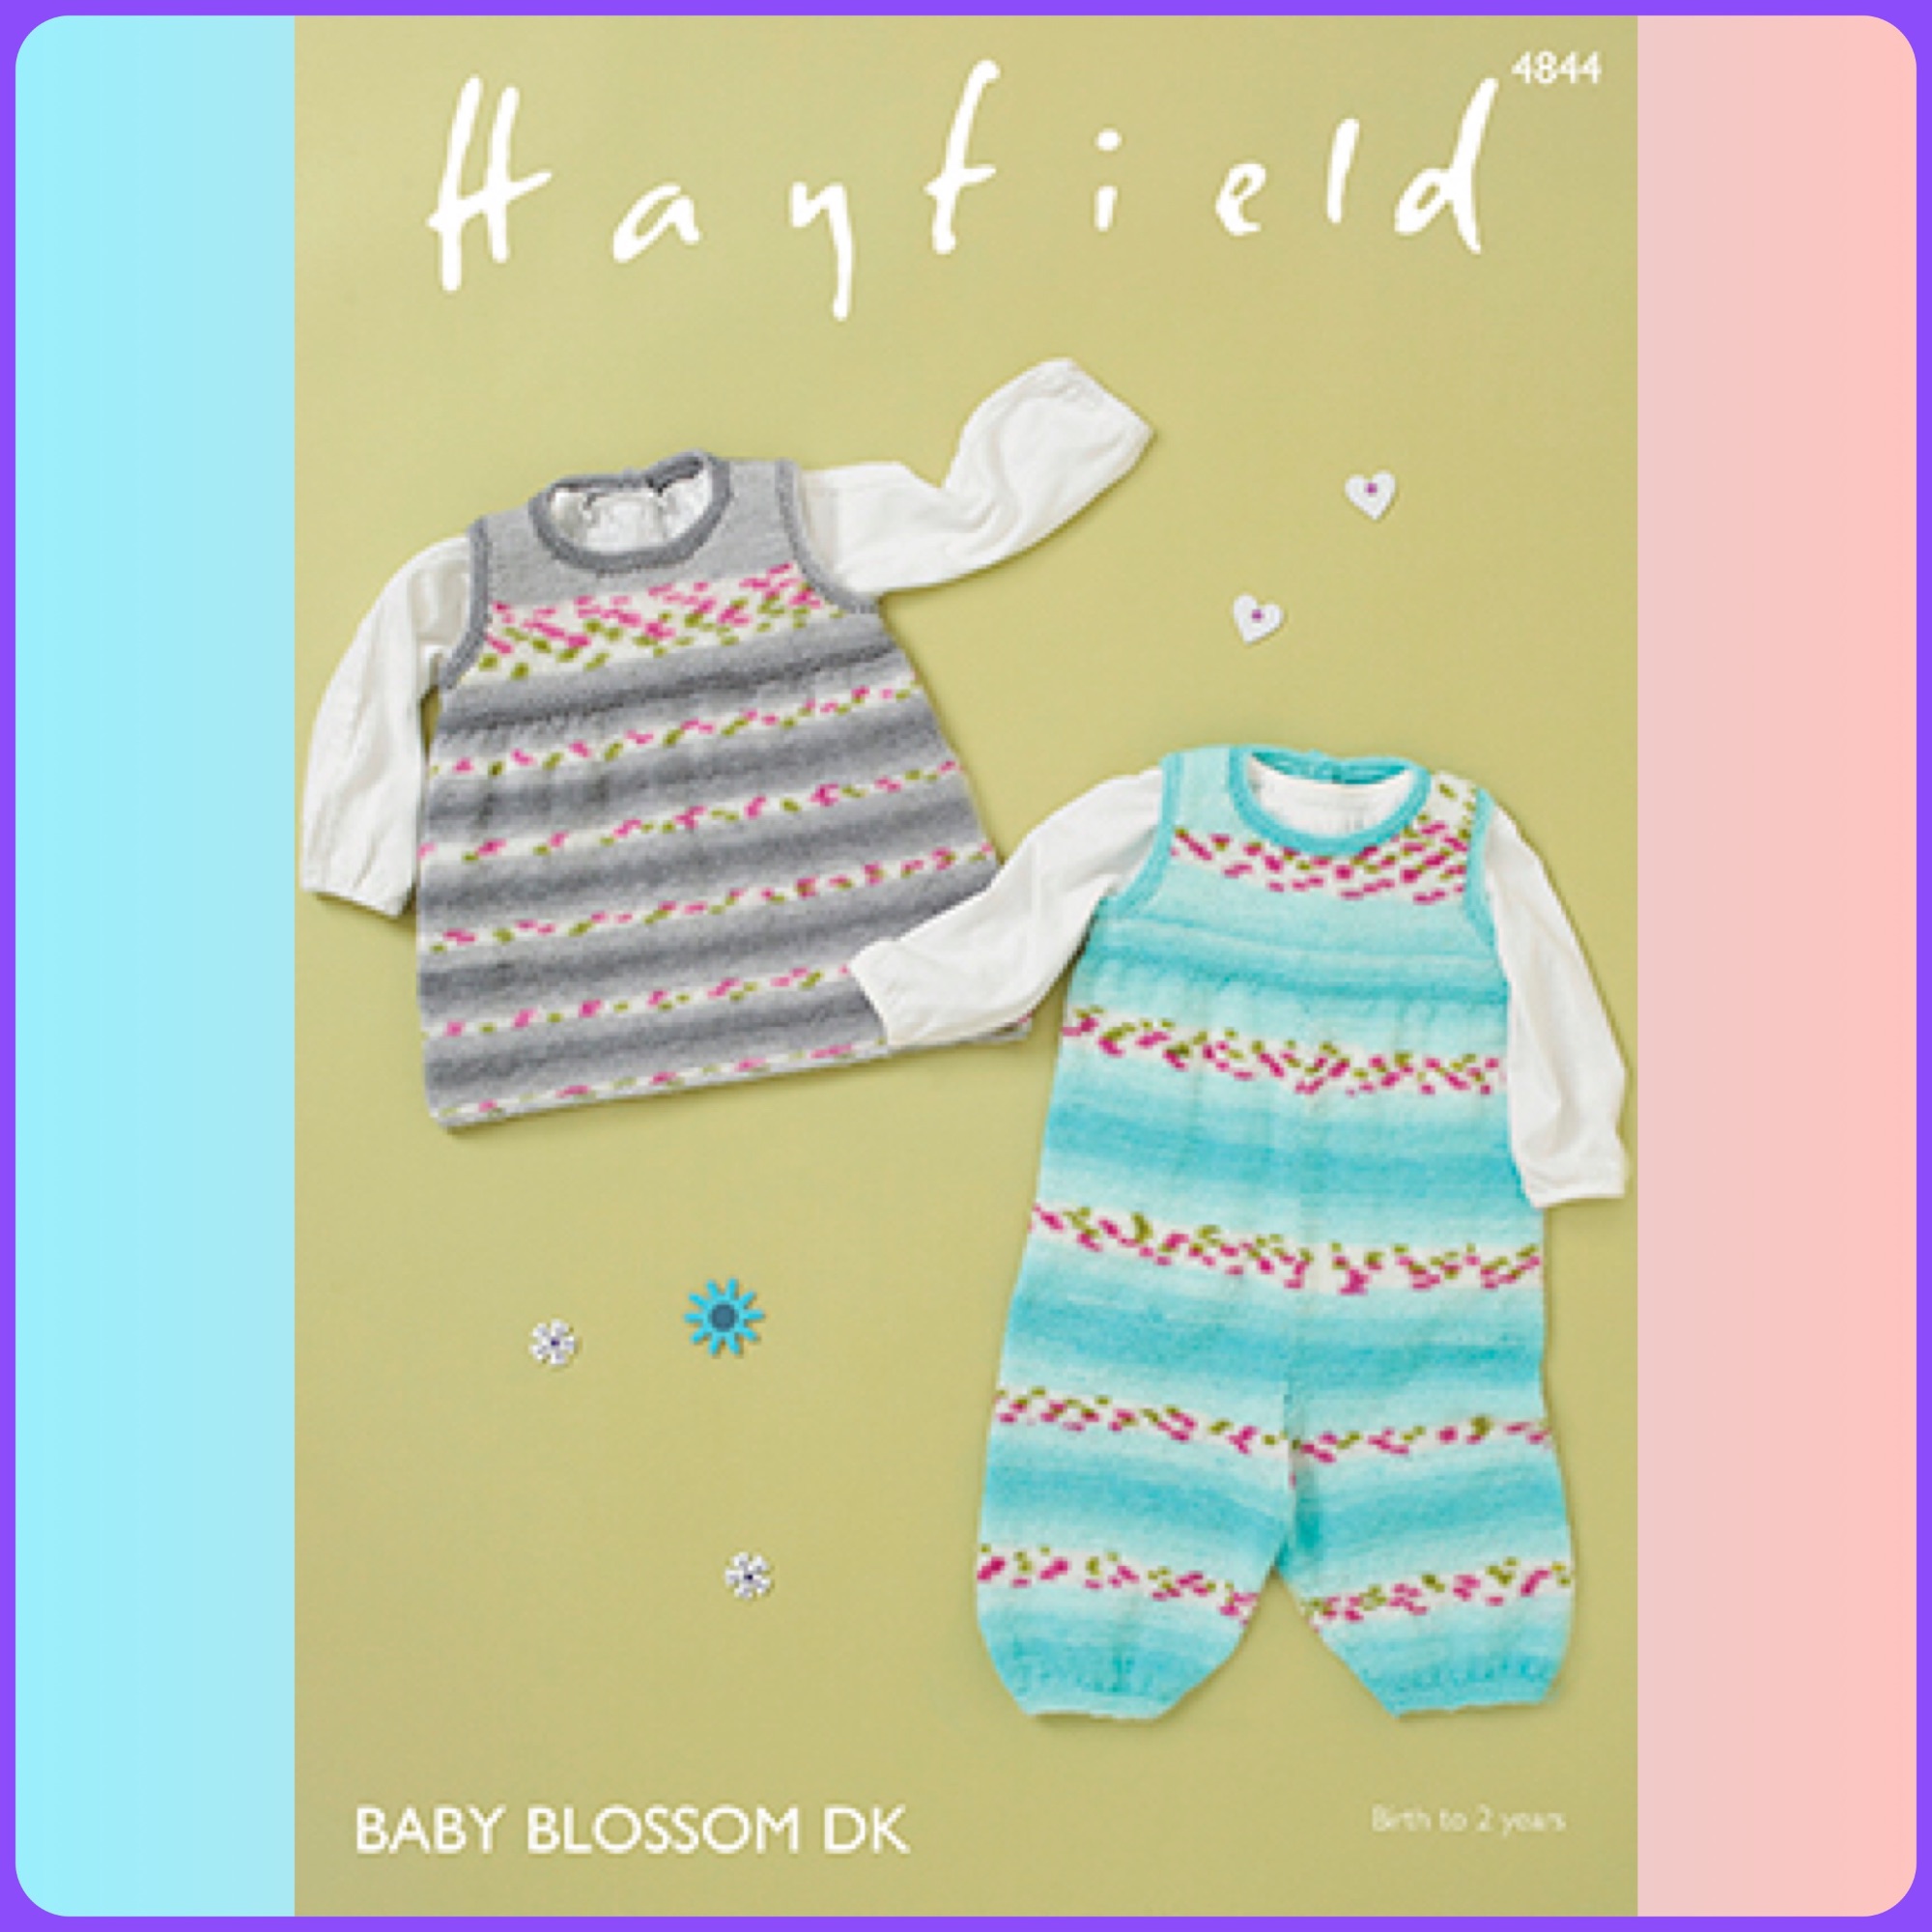 Hayfield baby blossom dk pattern dungaree and pinafore